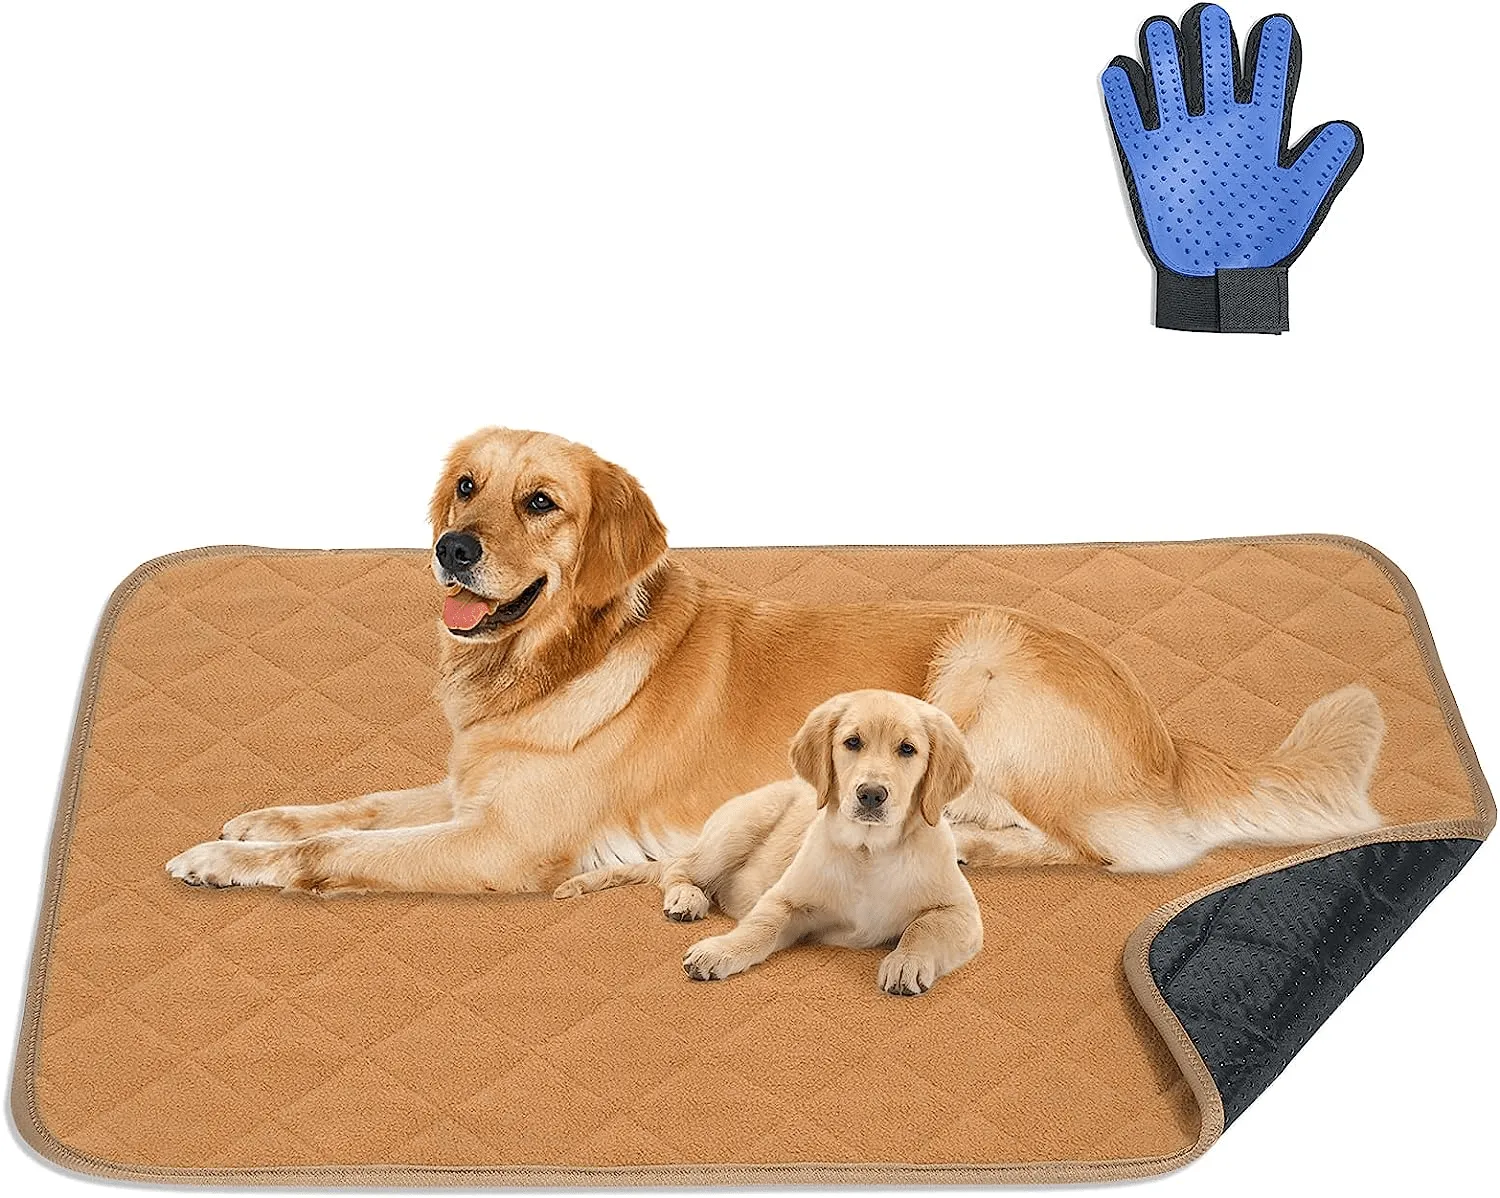 Reusable Pee Pads for Dogs